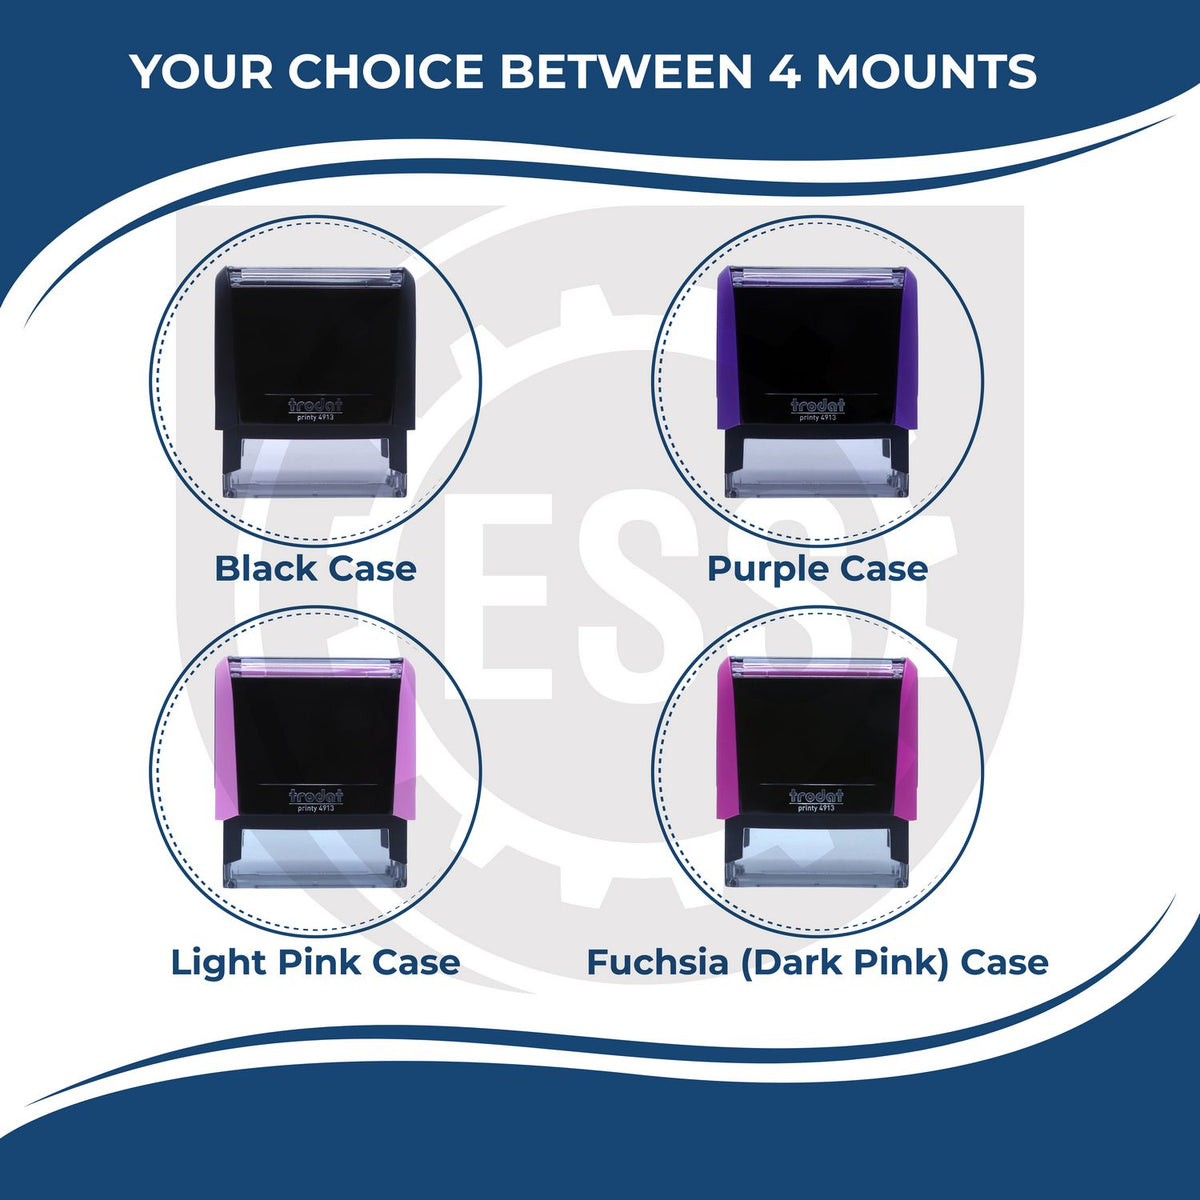 A picture of different colored mounts for the Self-Inking State Seal New York Notary Stamp featurning a Red, Blue or Black Mount